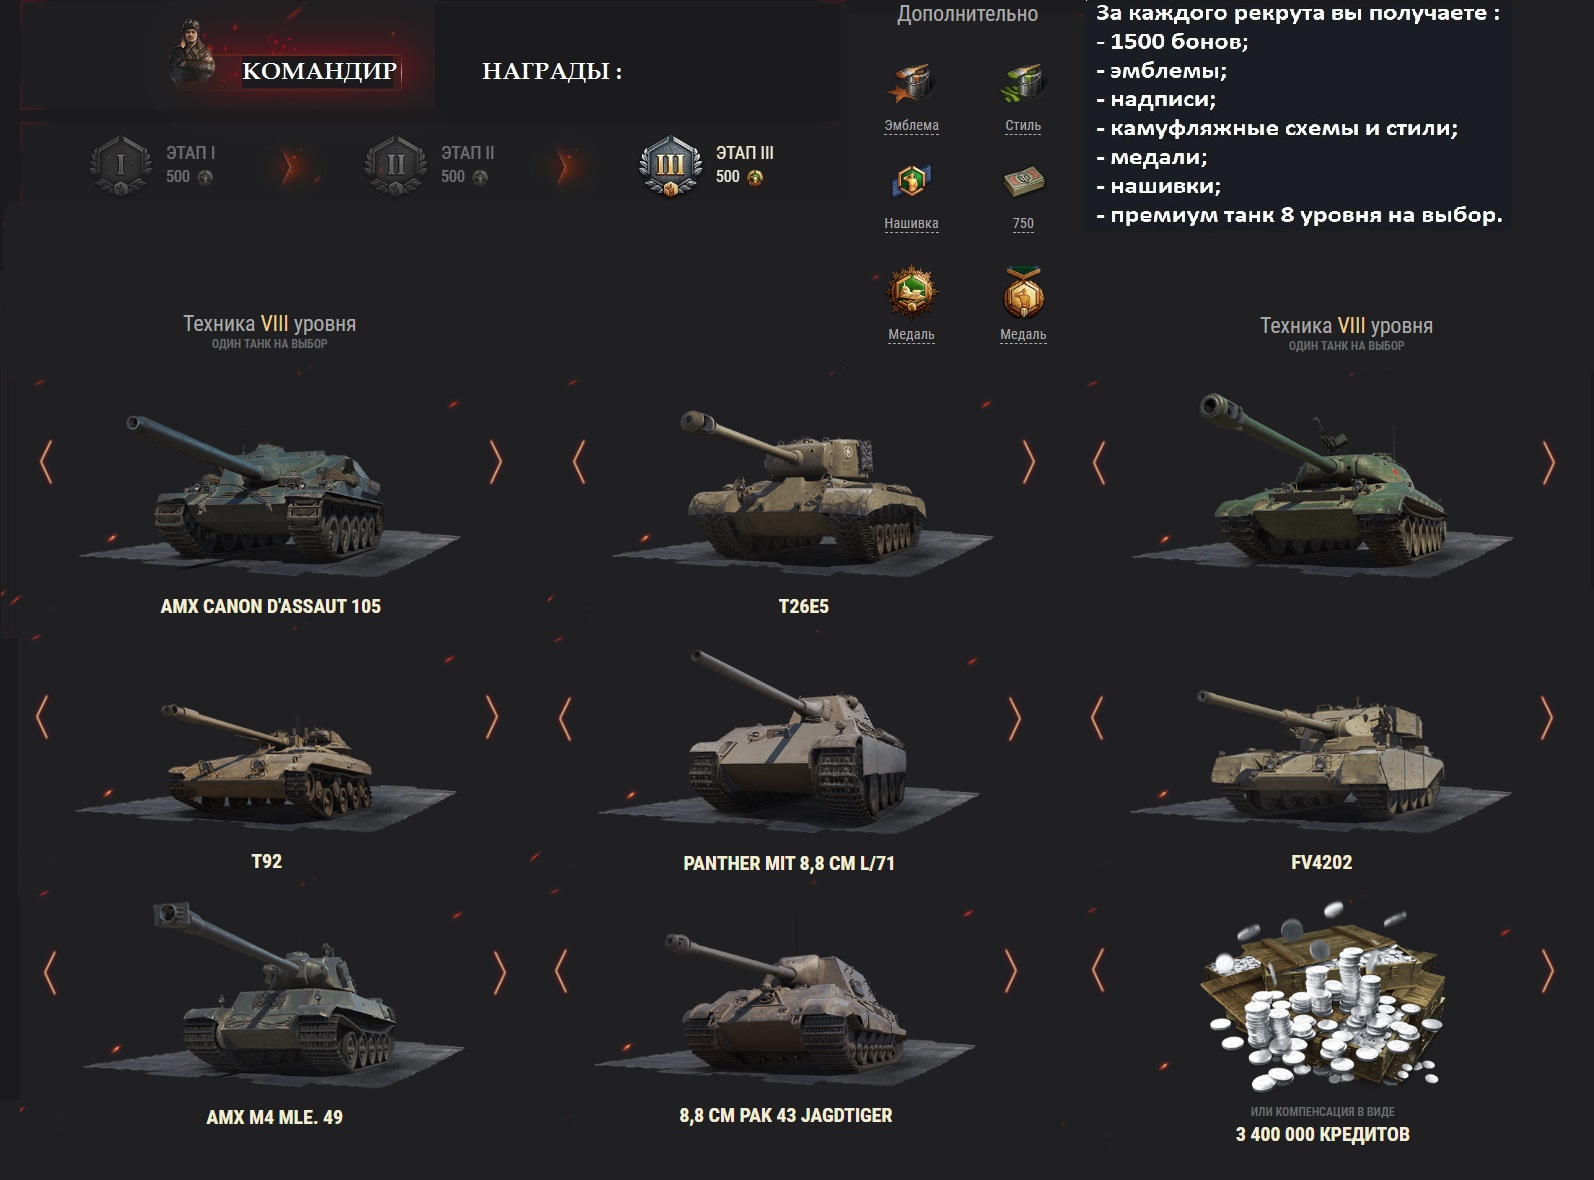 Buy Recruit Wot 3000 Bonds 2 Premium Tank Tier 8 Anyserv And Download